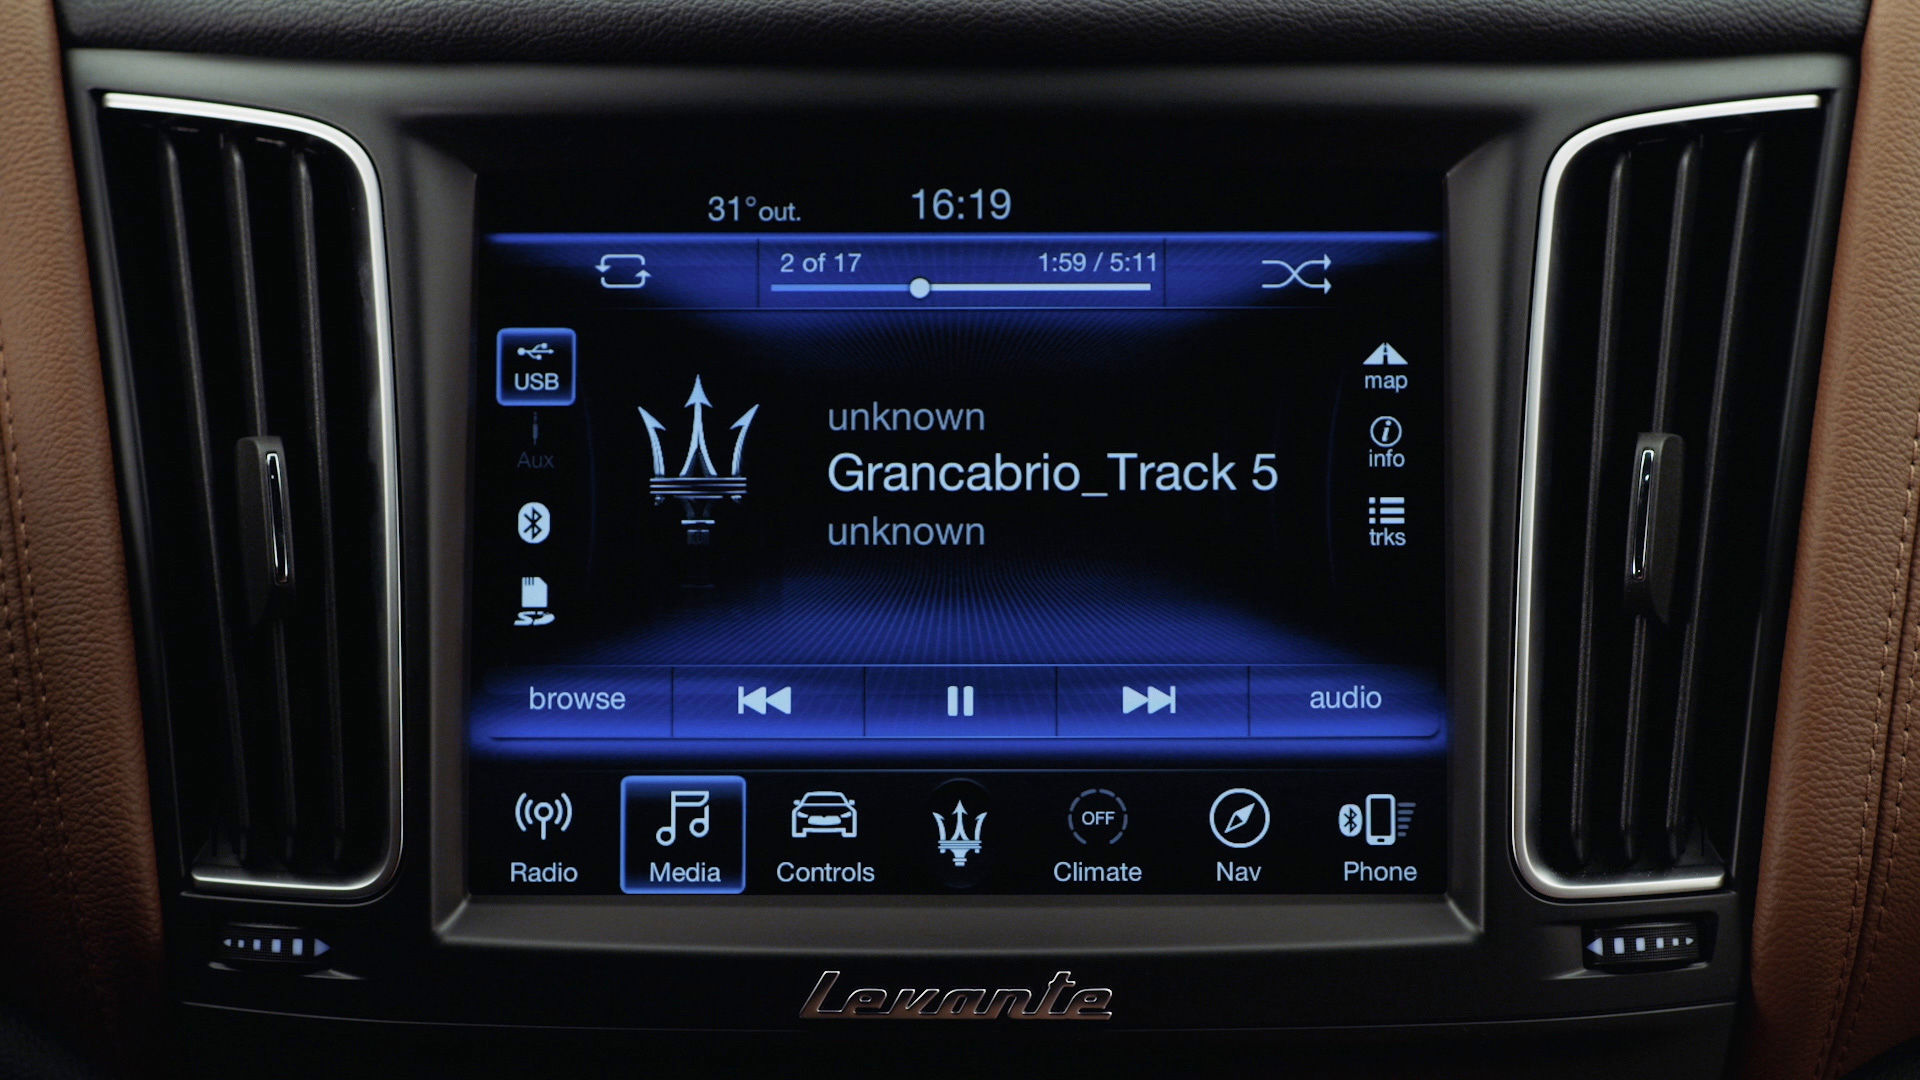 Maserati display and Bluetooth connection: Media